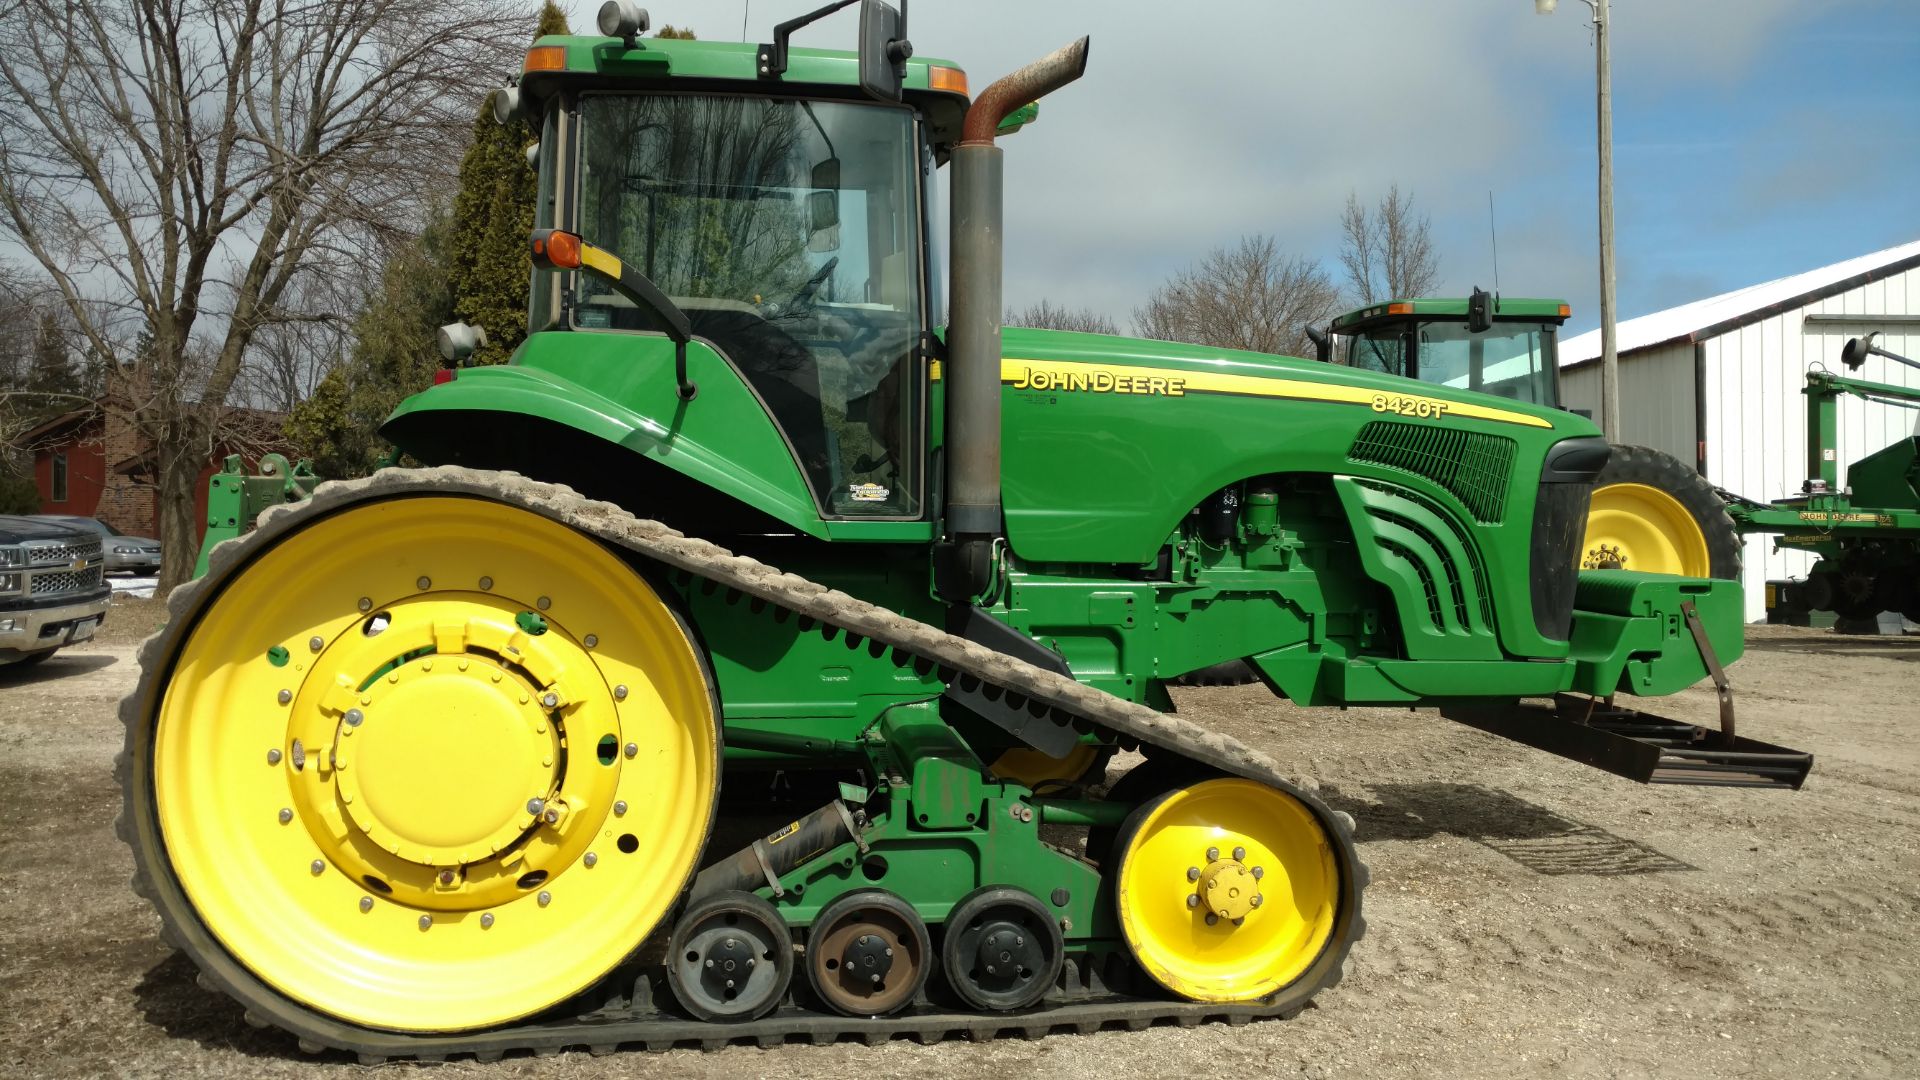 2002 JD 8420T, 24 inch tracks, quick coupler, full set of front weights, buddy seat, 4 hyd. outlets, - Image 3 of 6